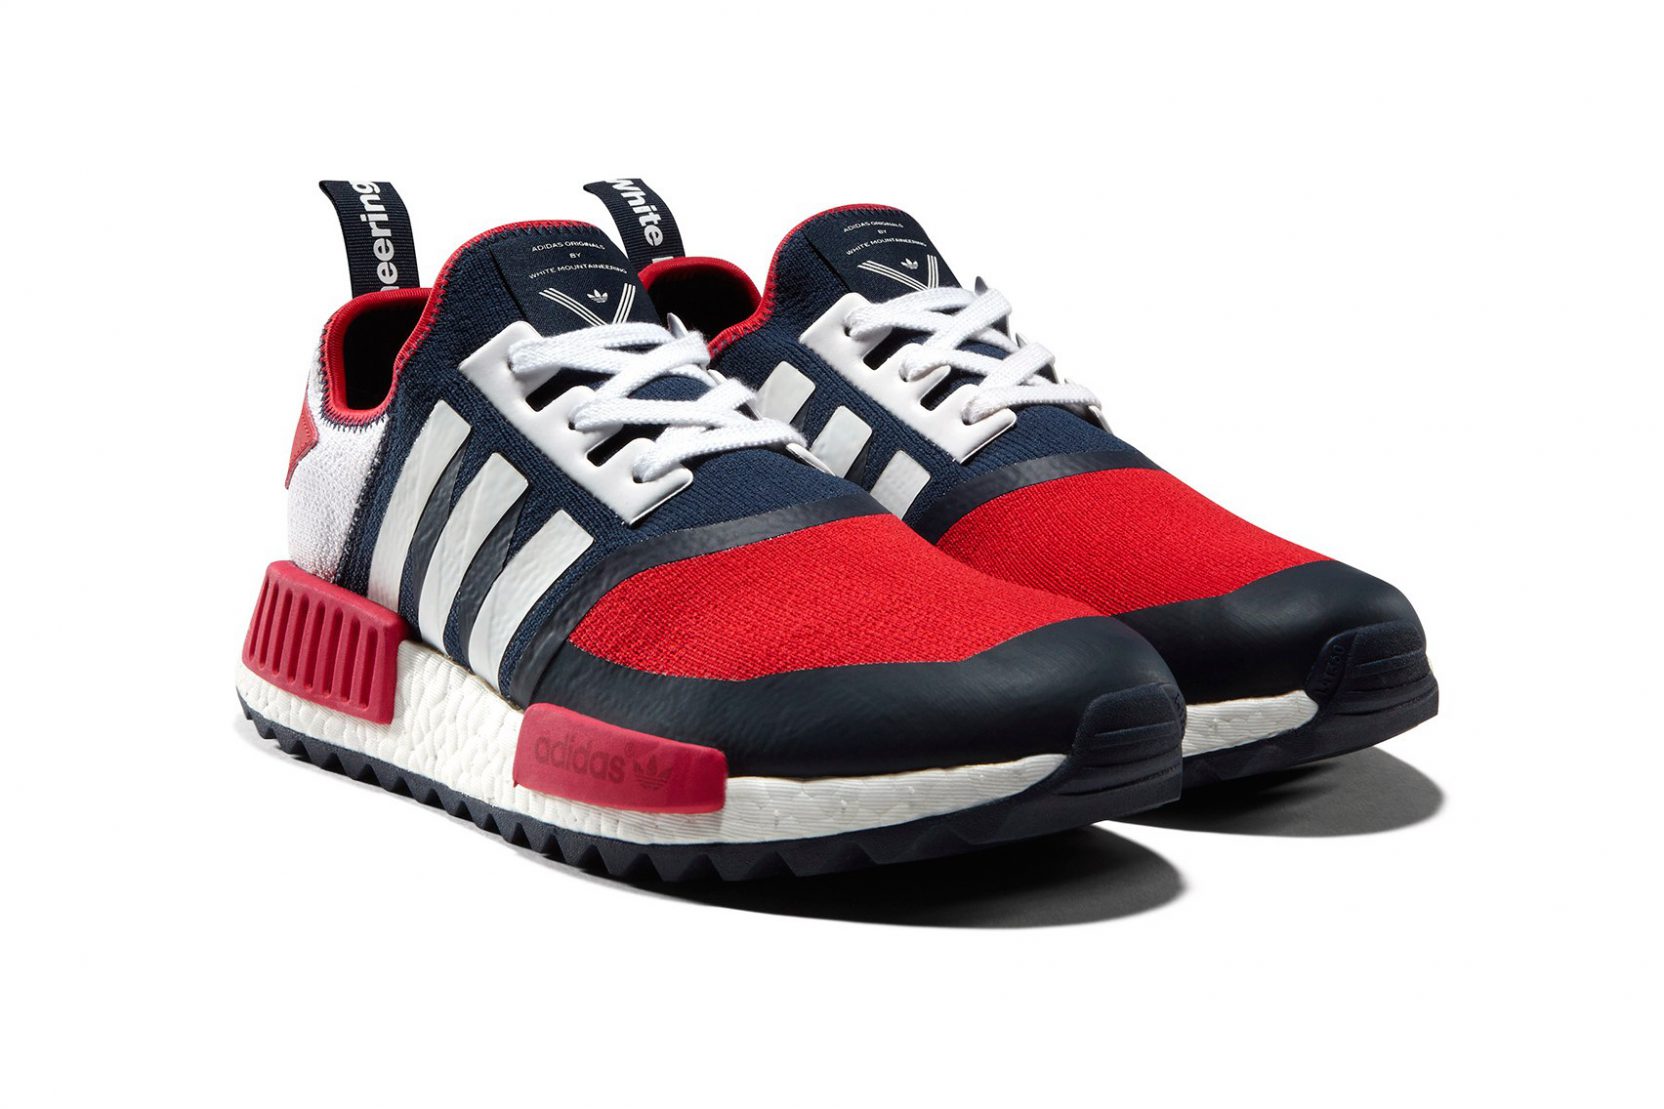 White Mountaineering x Adidas Spring Collection 1